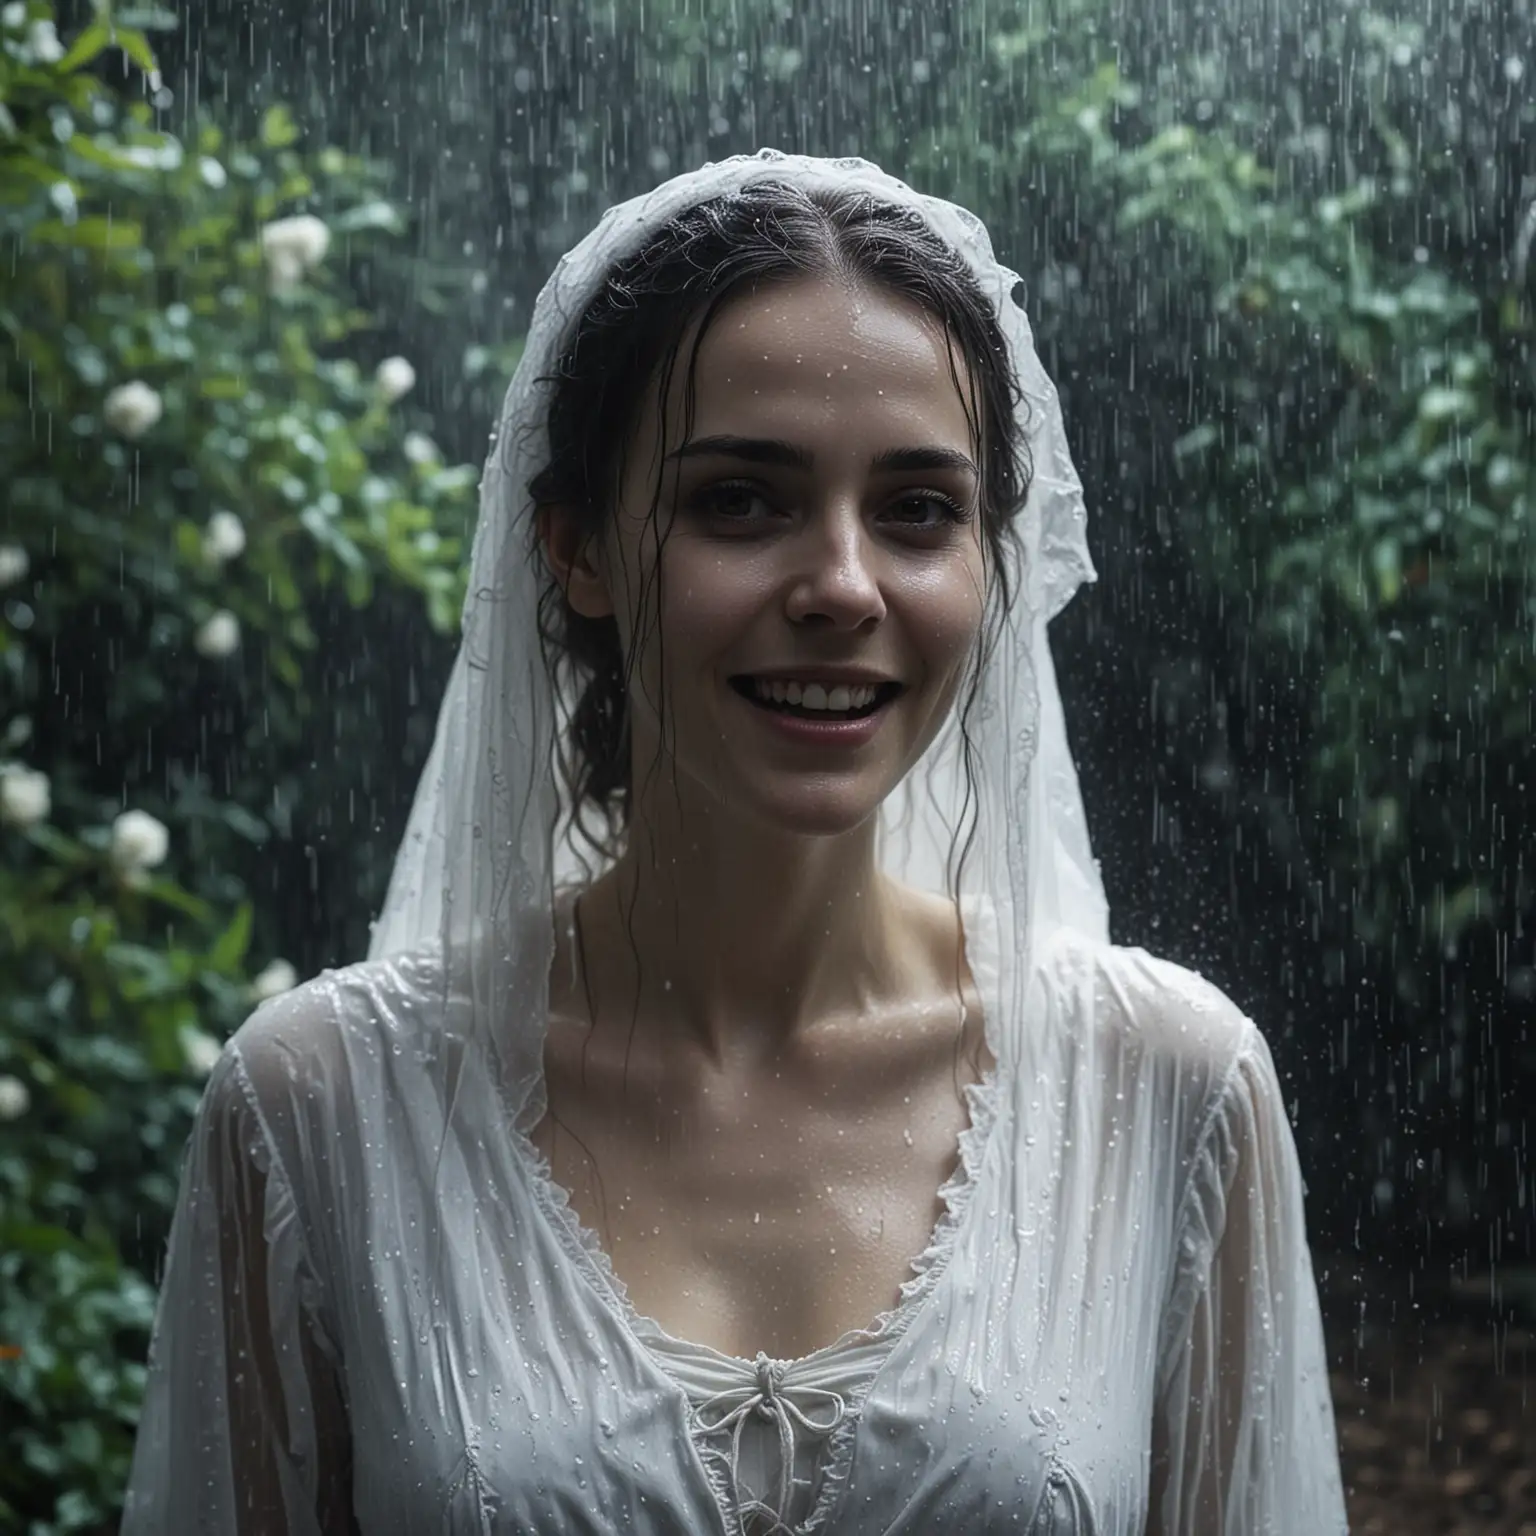 horror creepy gaunt pale ghost woman in white virgin dress, she is smiling, she is in the rain in the garden, cinematic, dark, horror movie
